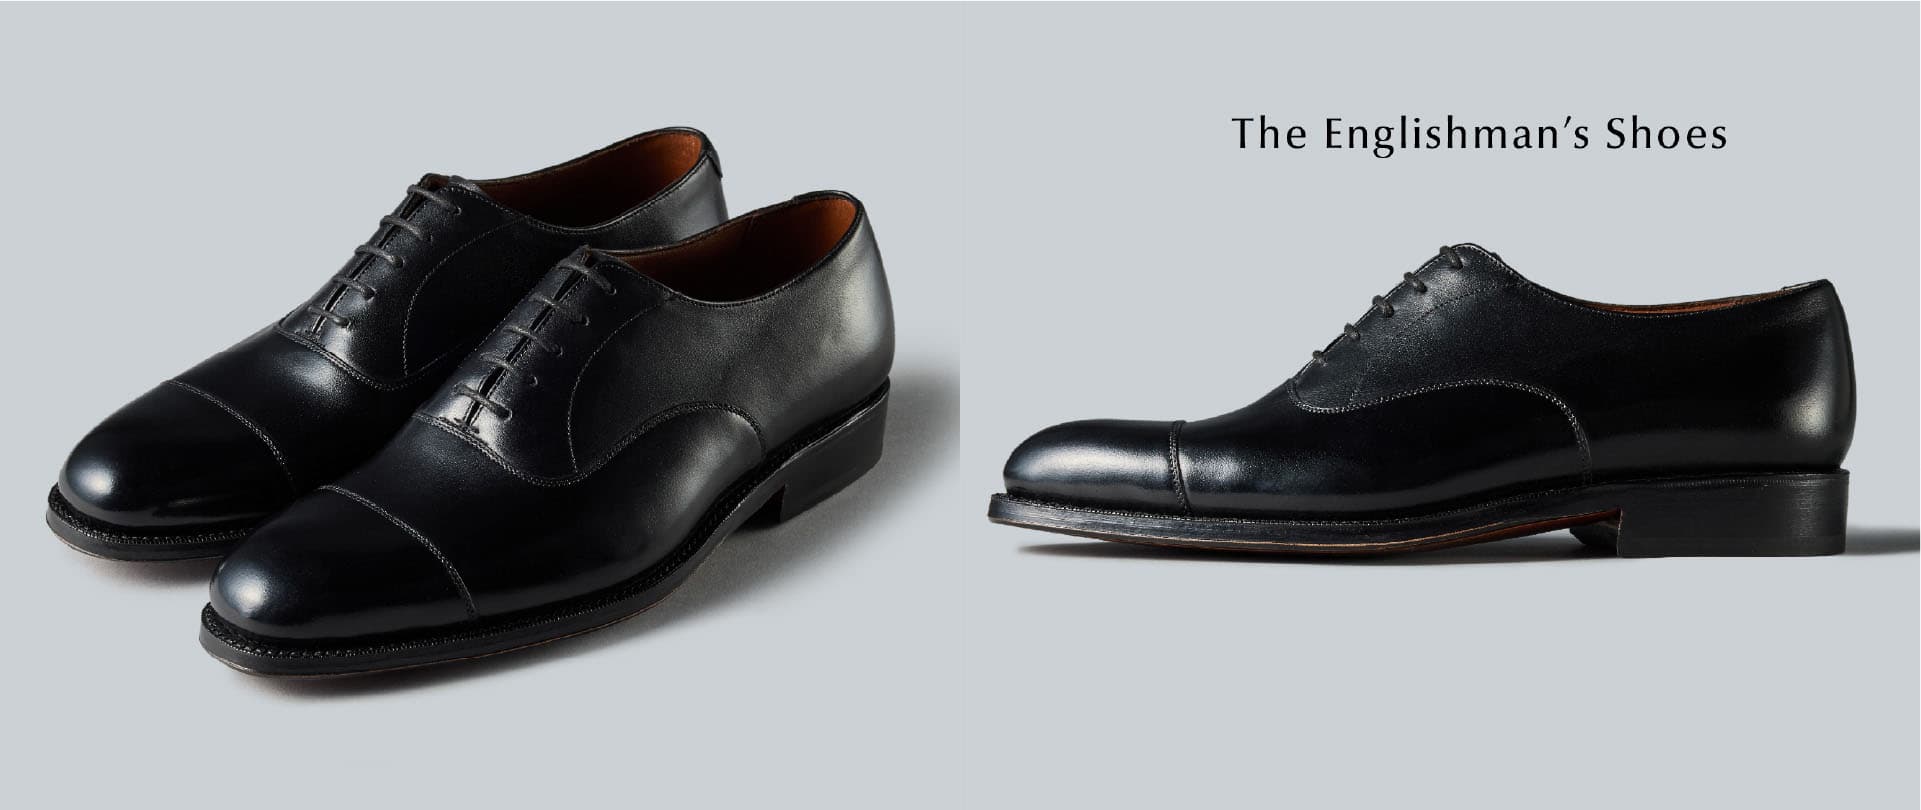 The Englishman's shoes